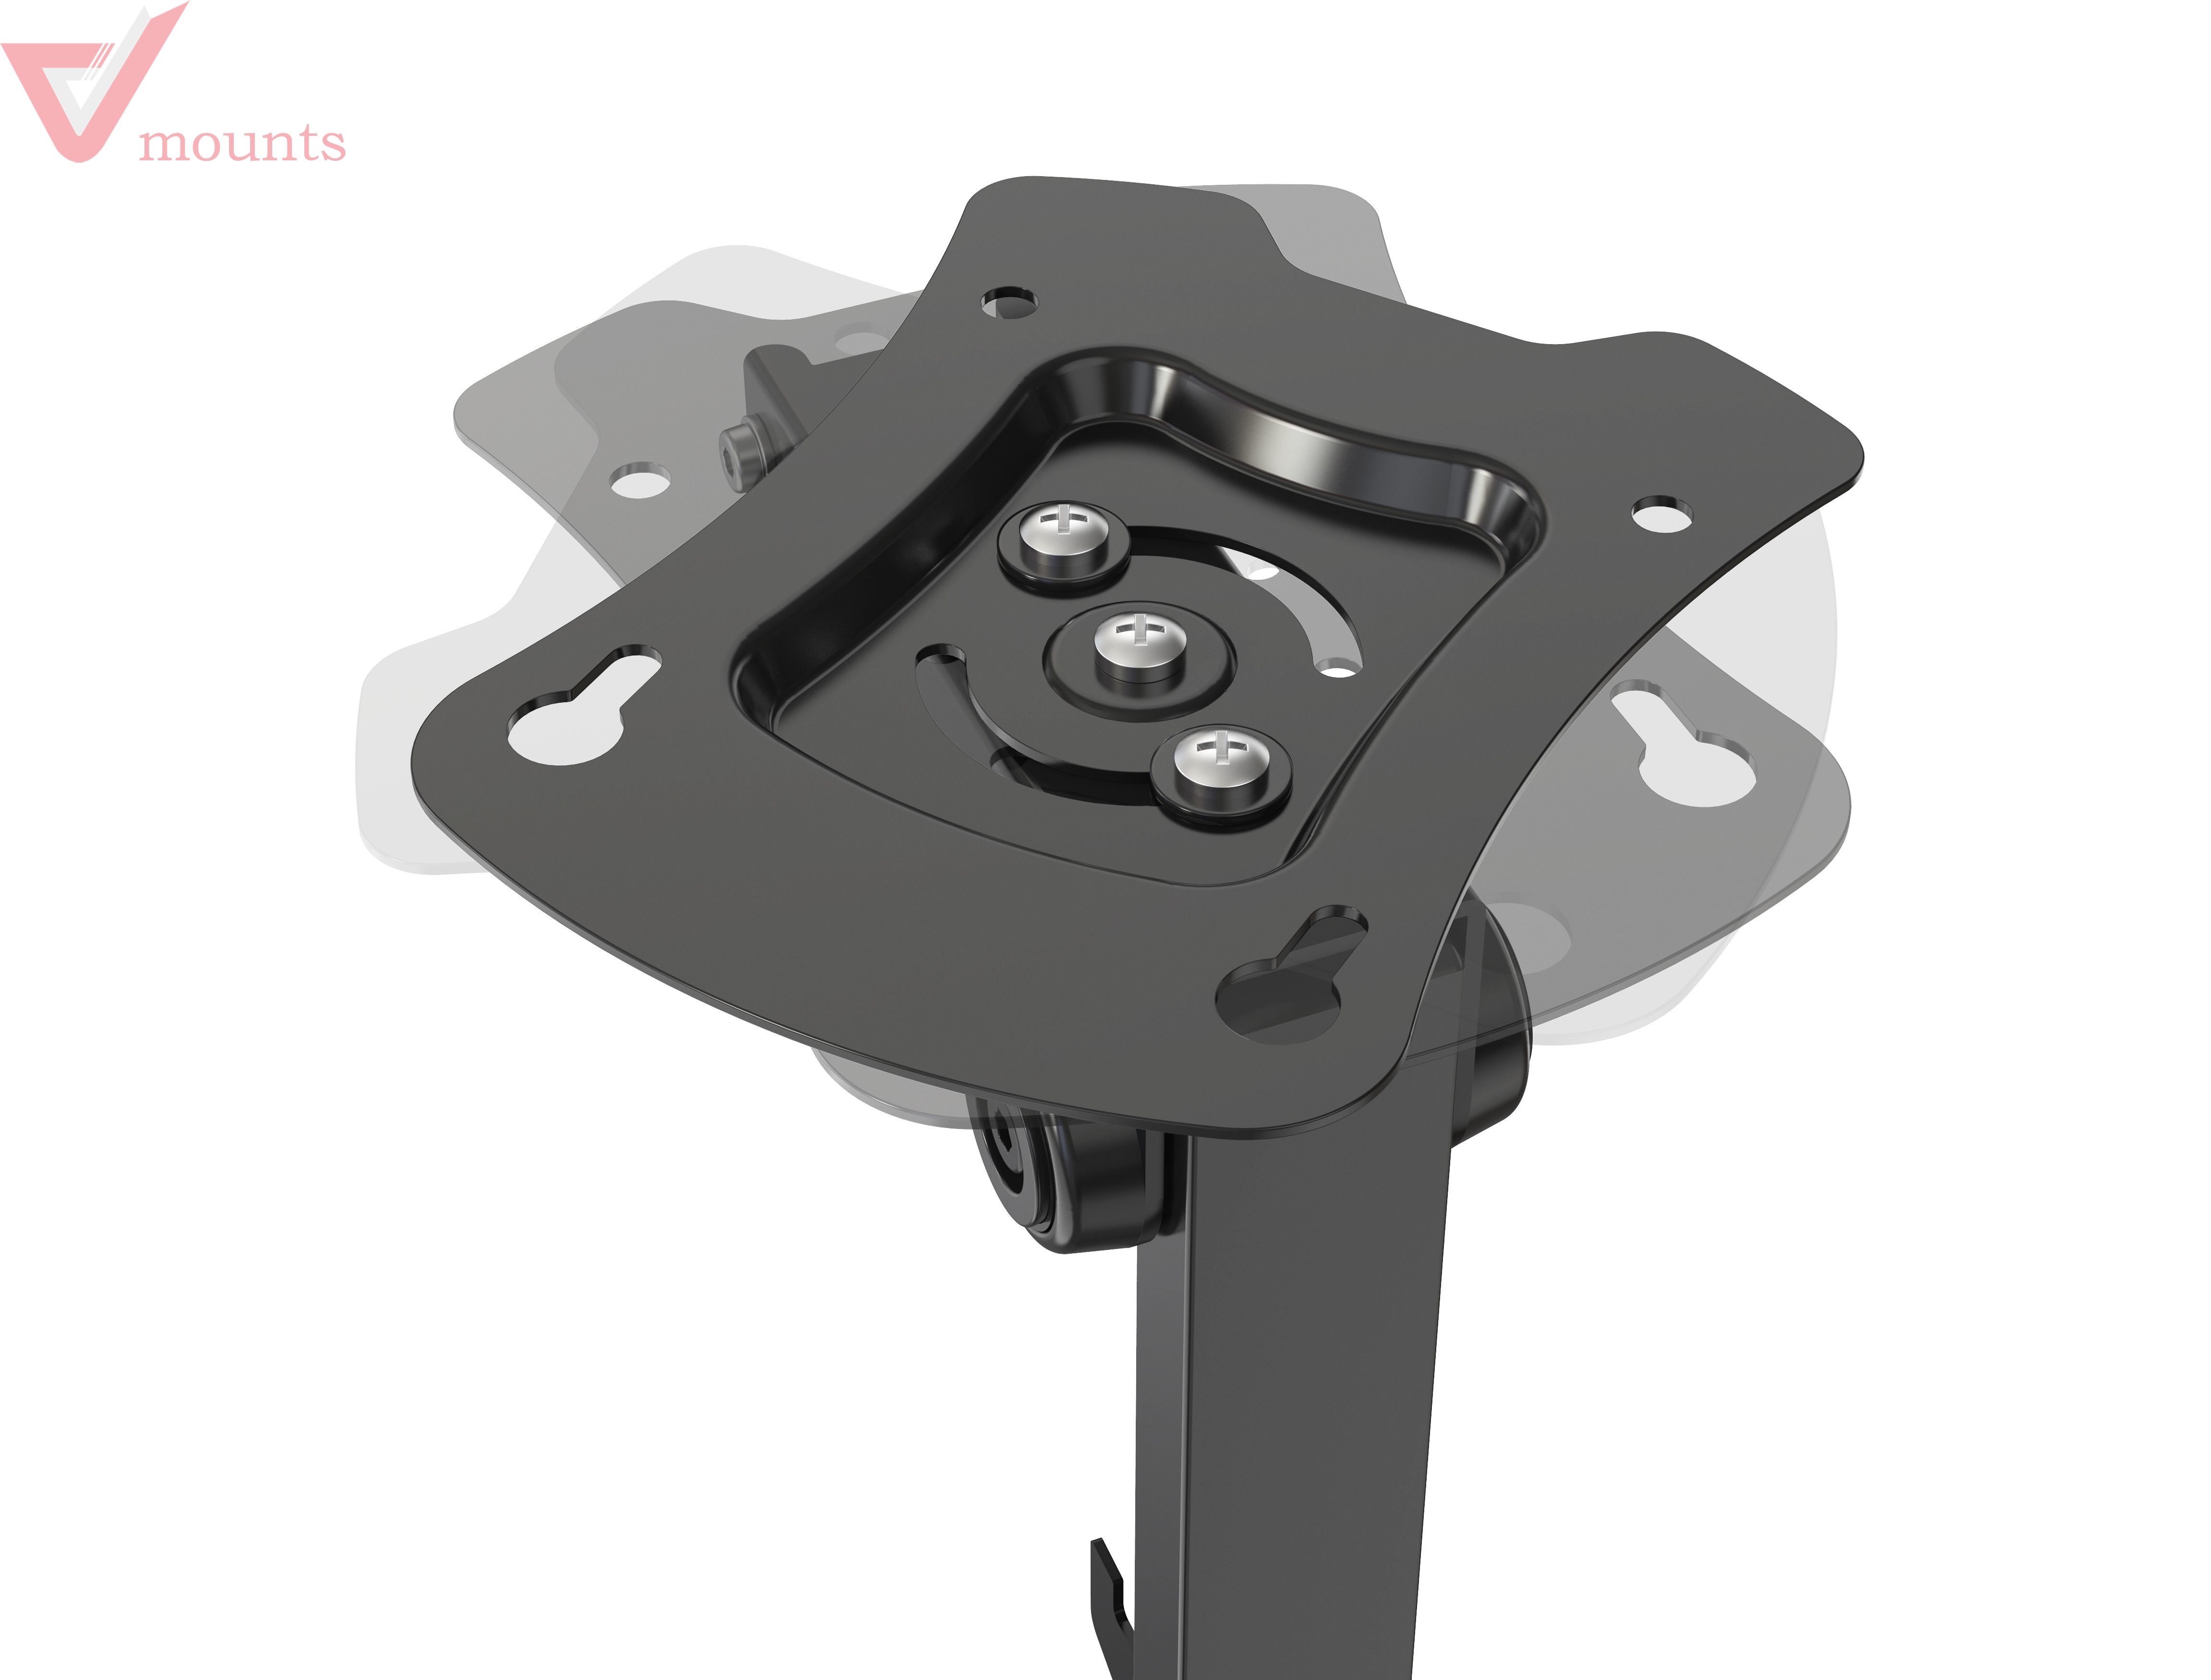 V-mounts Steel, foldable closed, suitable for 17-27 inches, angle height adjustable small TV ceiling bracket VM-CP08